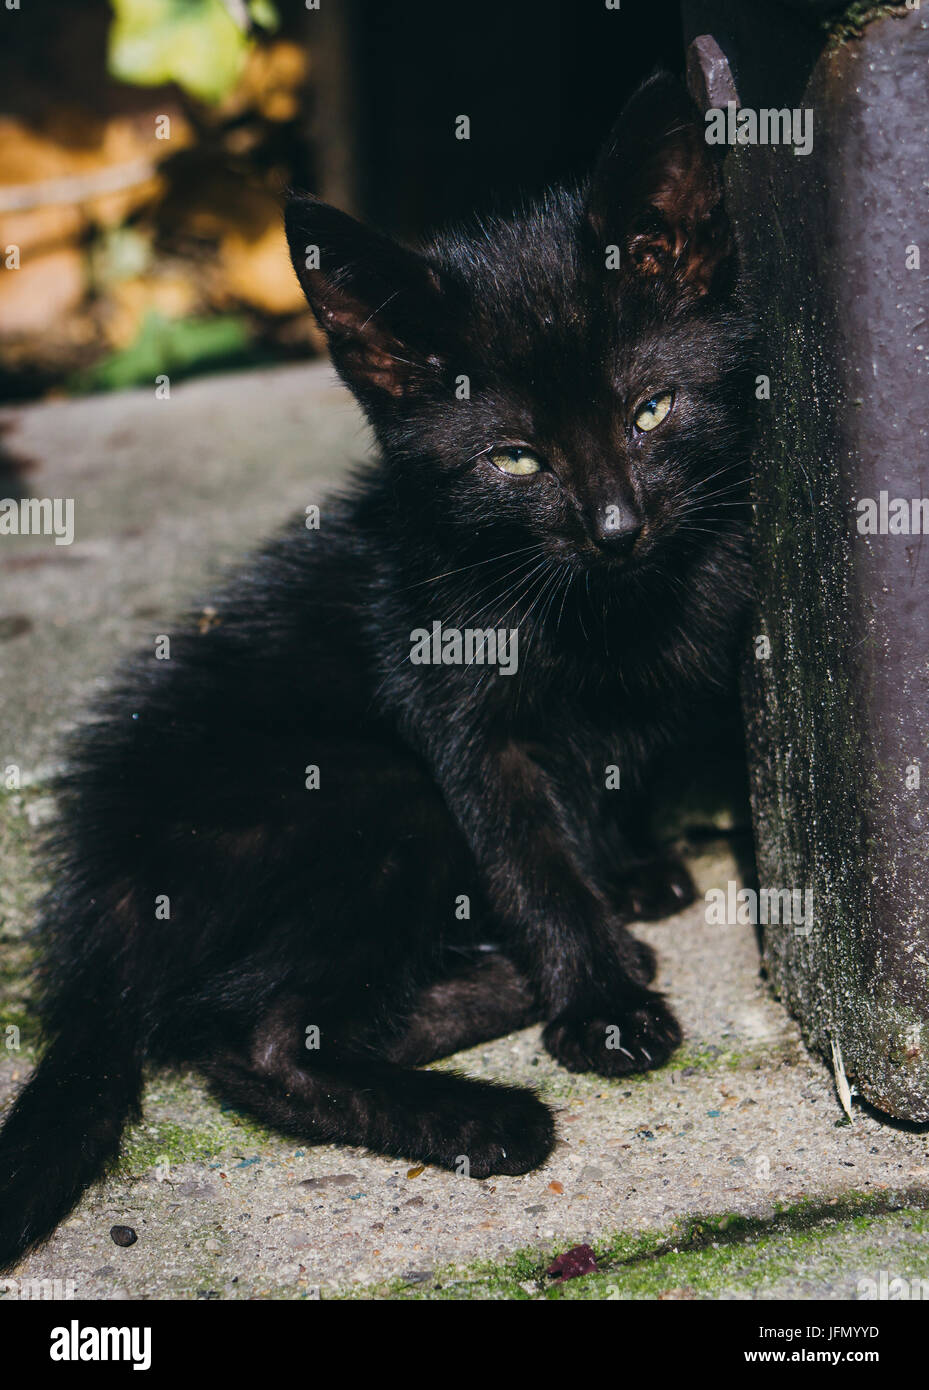 Black kitten leaning against a wall in the sunshine. Stock Photo